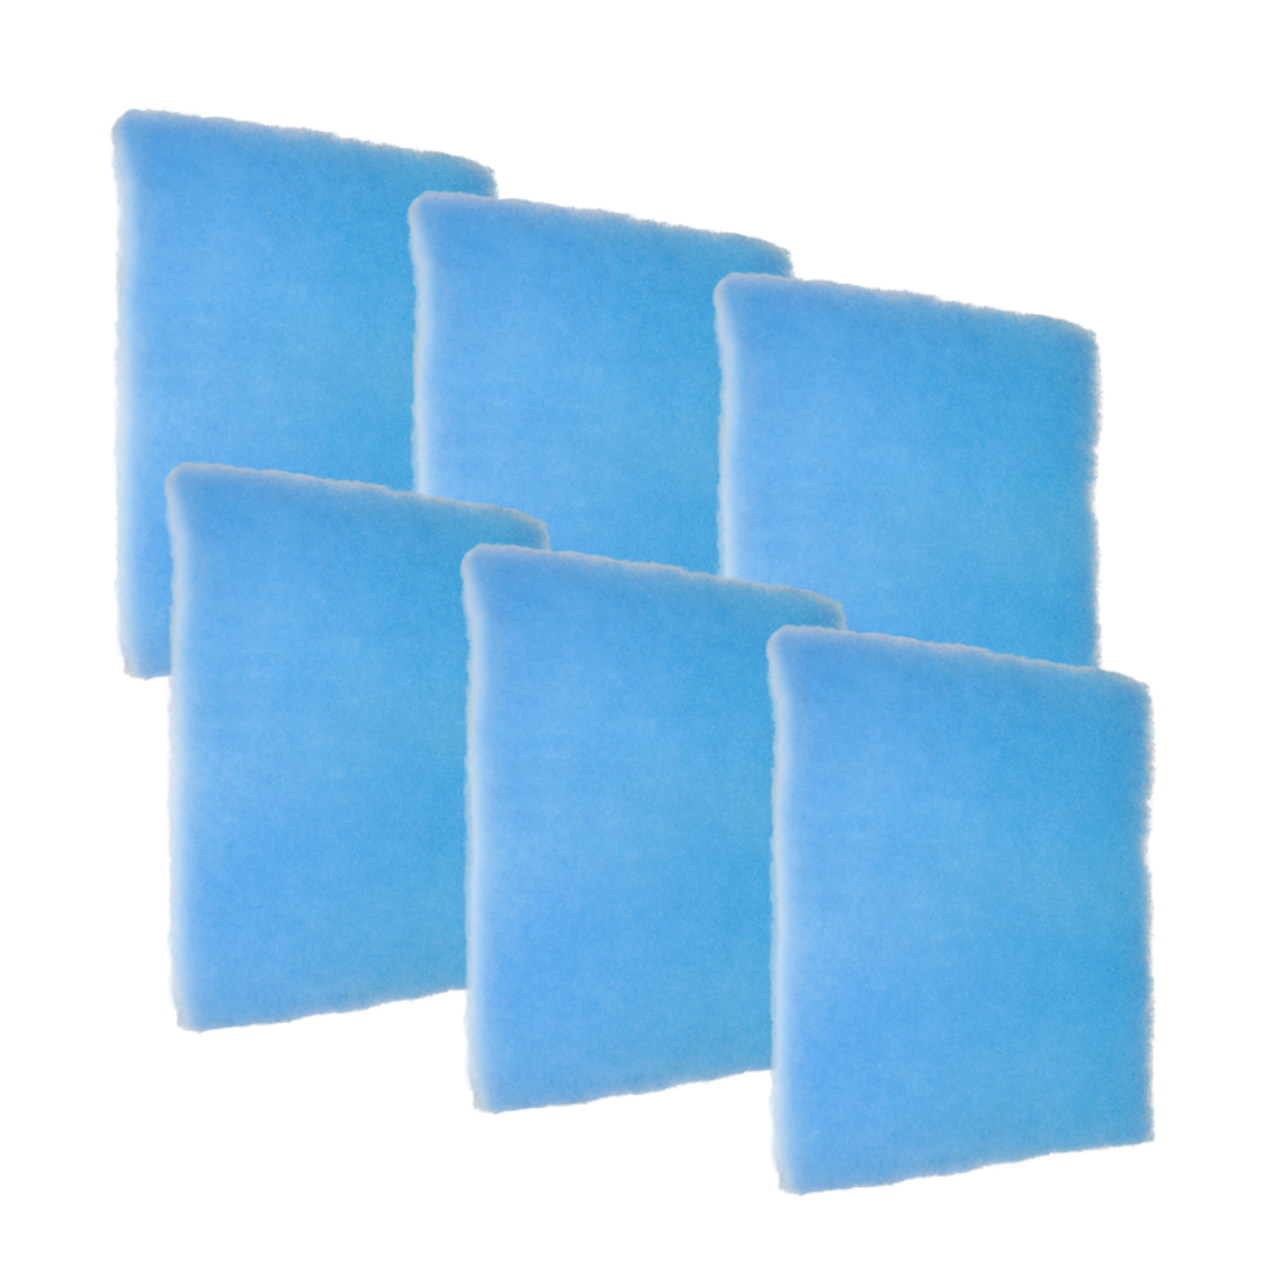 6 Pack of Blue Screen 1" Air Filter